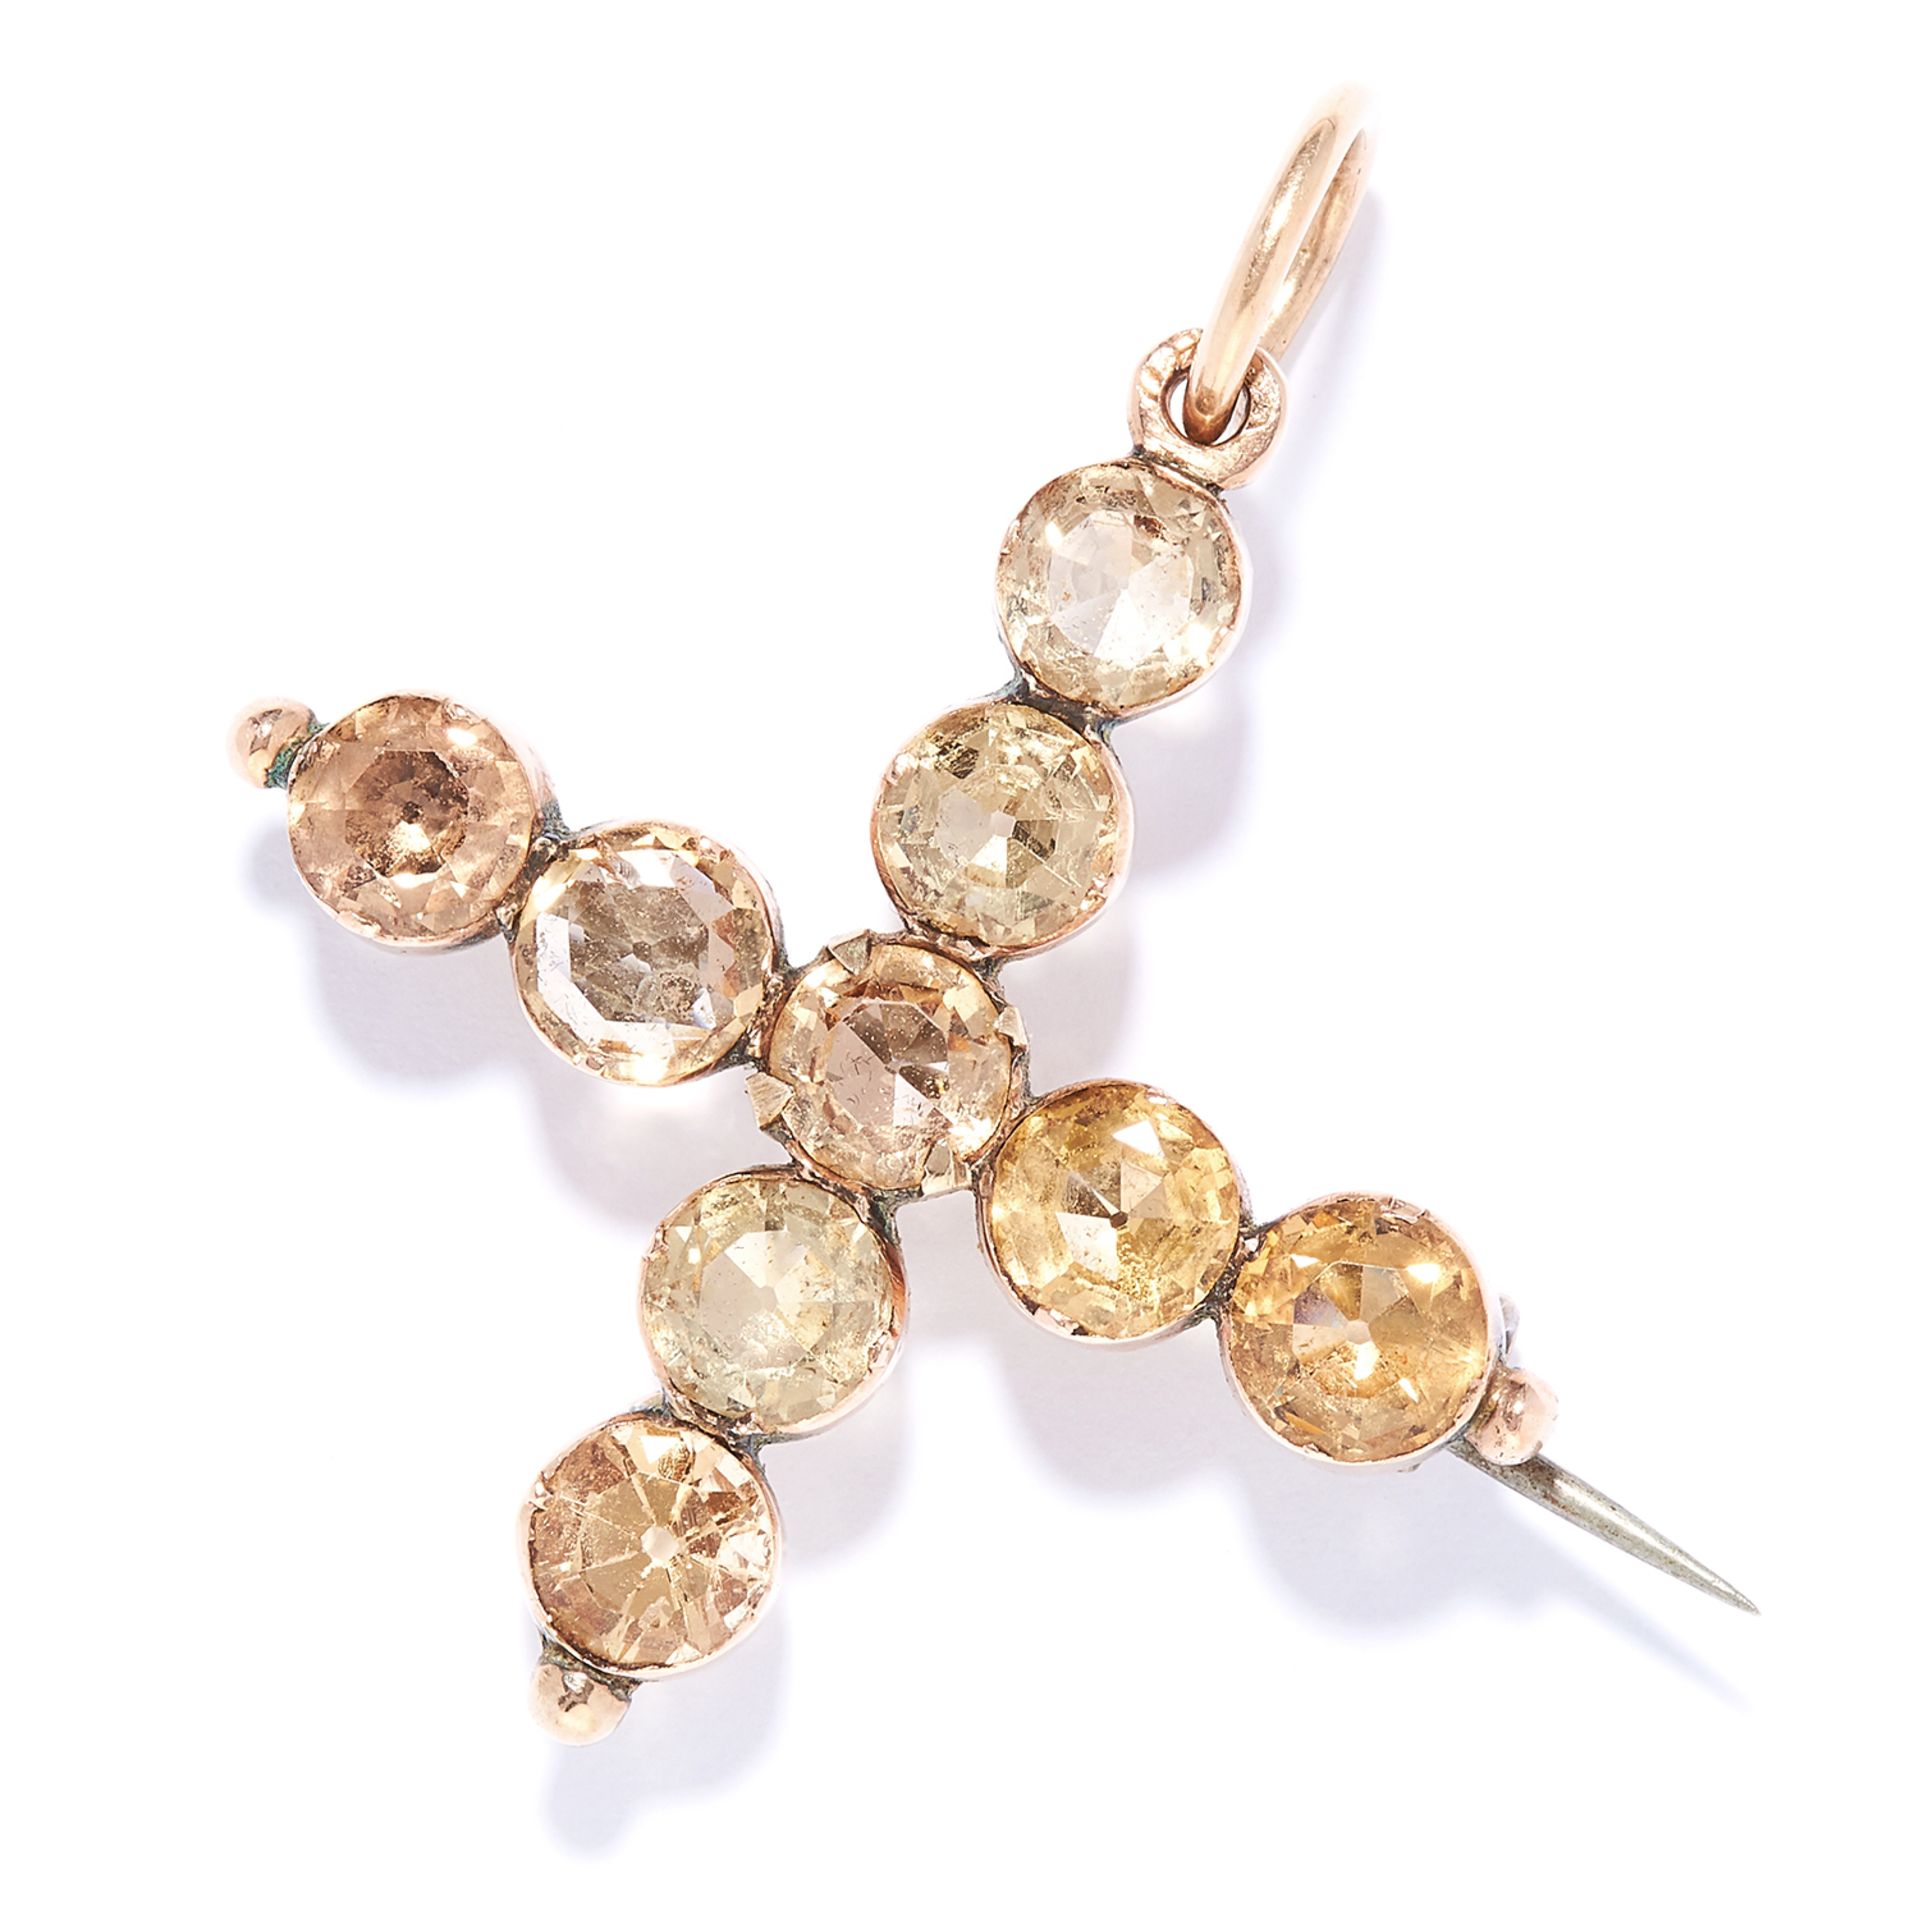 ANTIQUE TOPAZ CROSS BROOCH / PENDANT in high carat yellow gold, set with round cut topaz,